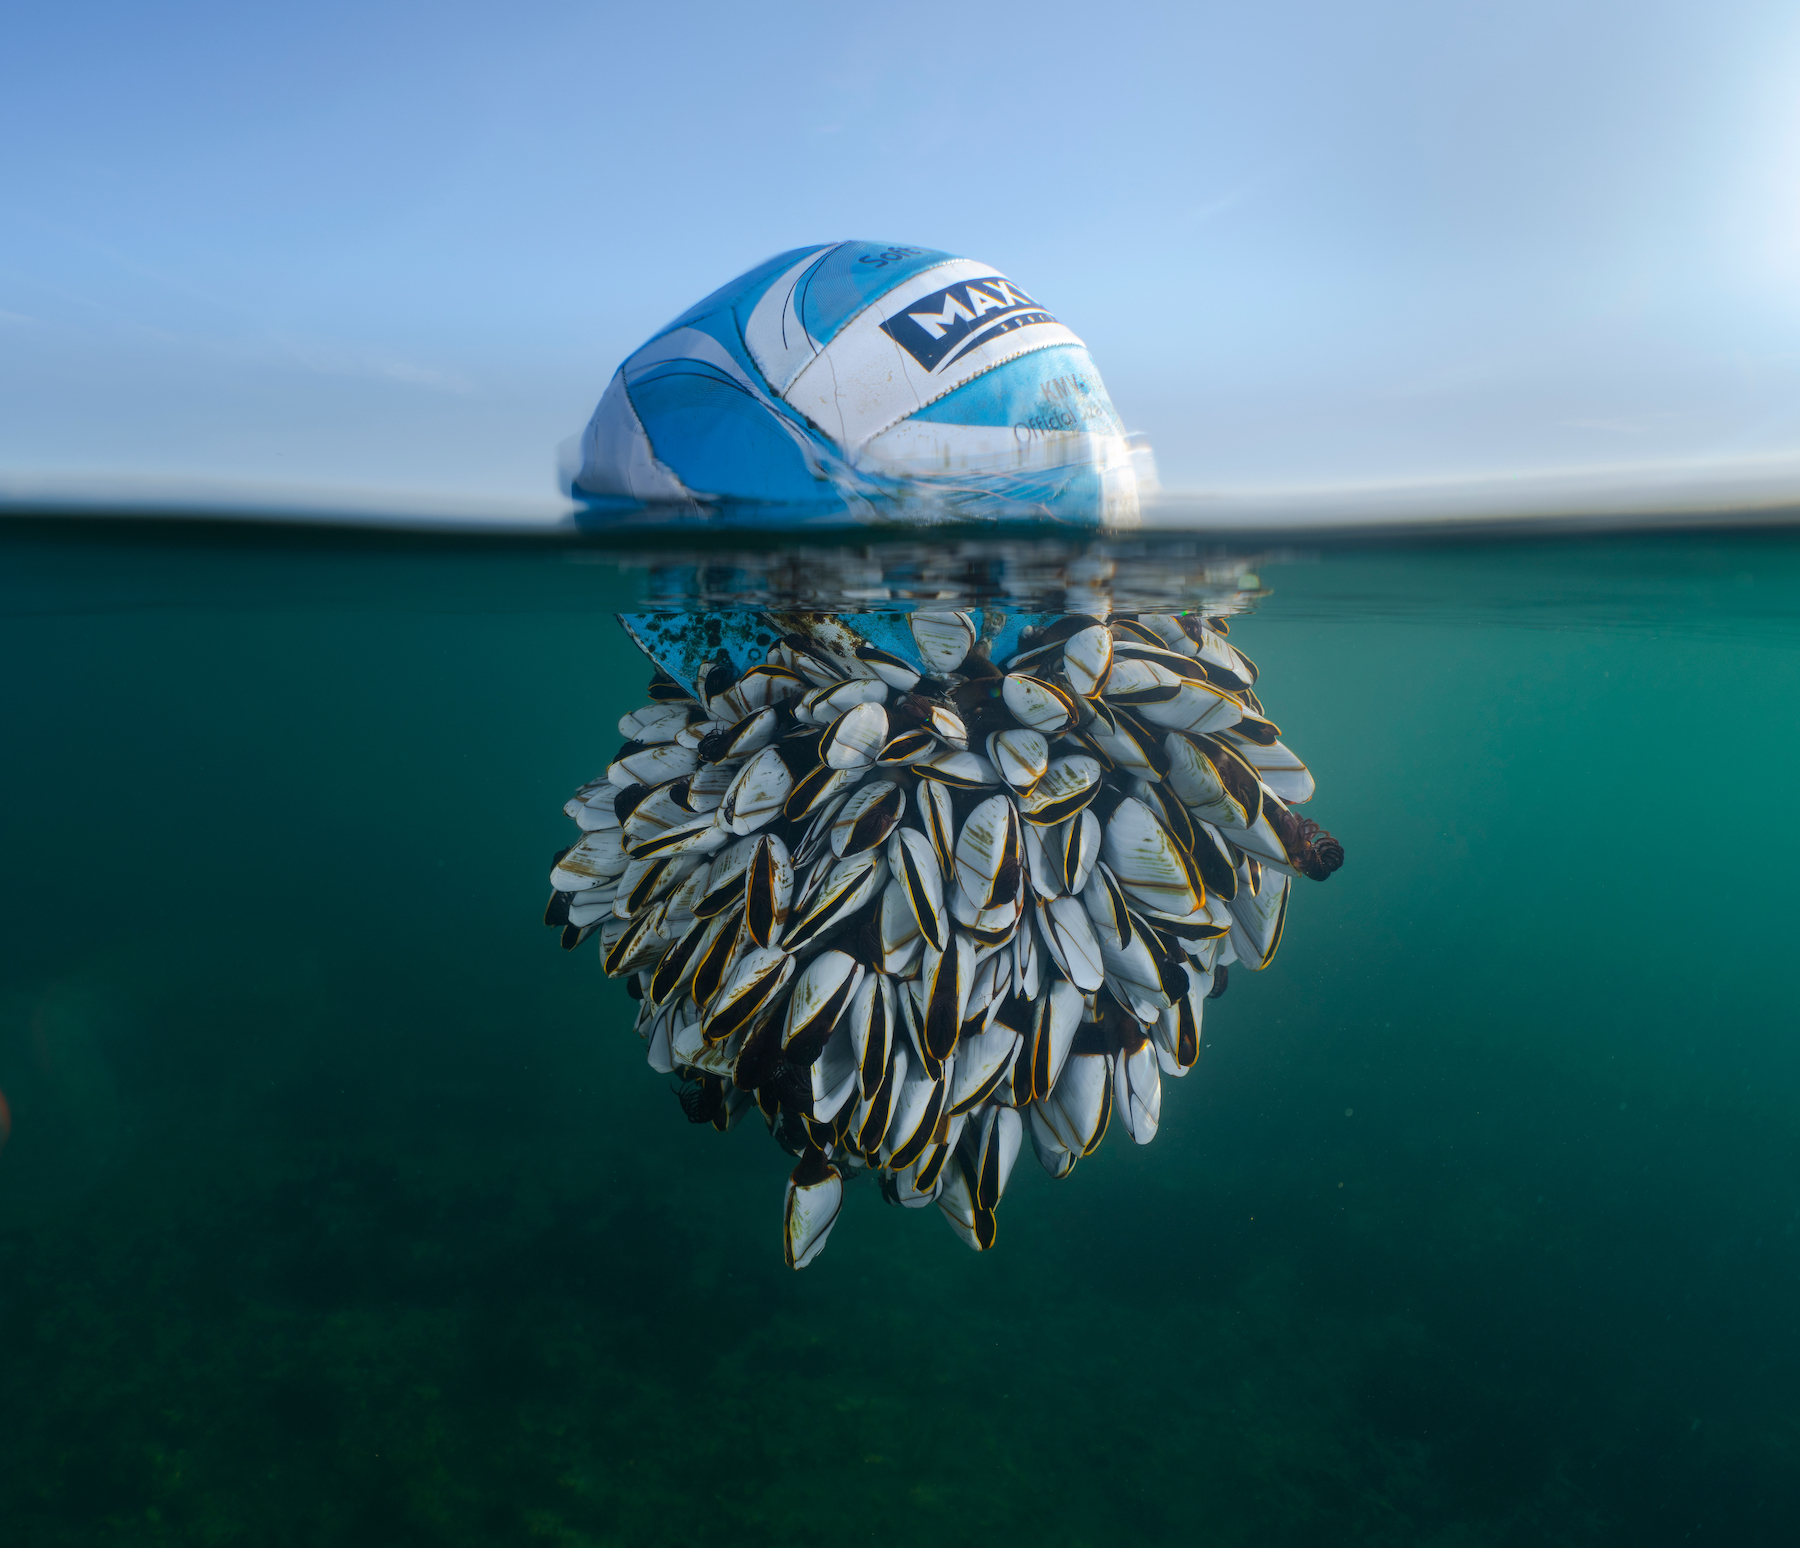 a soccer ball floats on the water. under the waterline are dozens of barnacles attached to the bottom of the ball